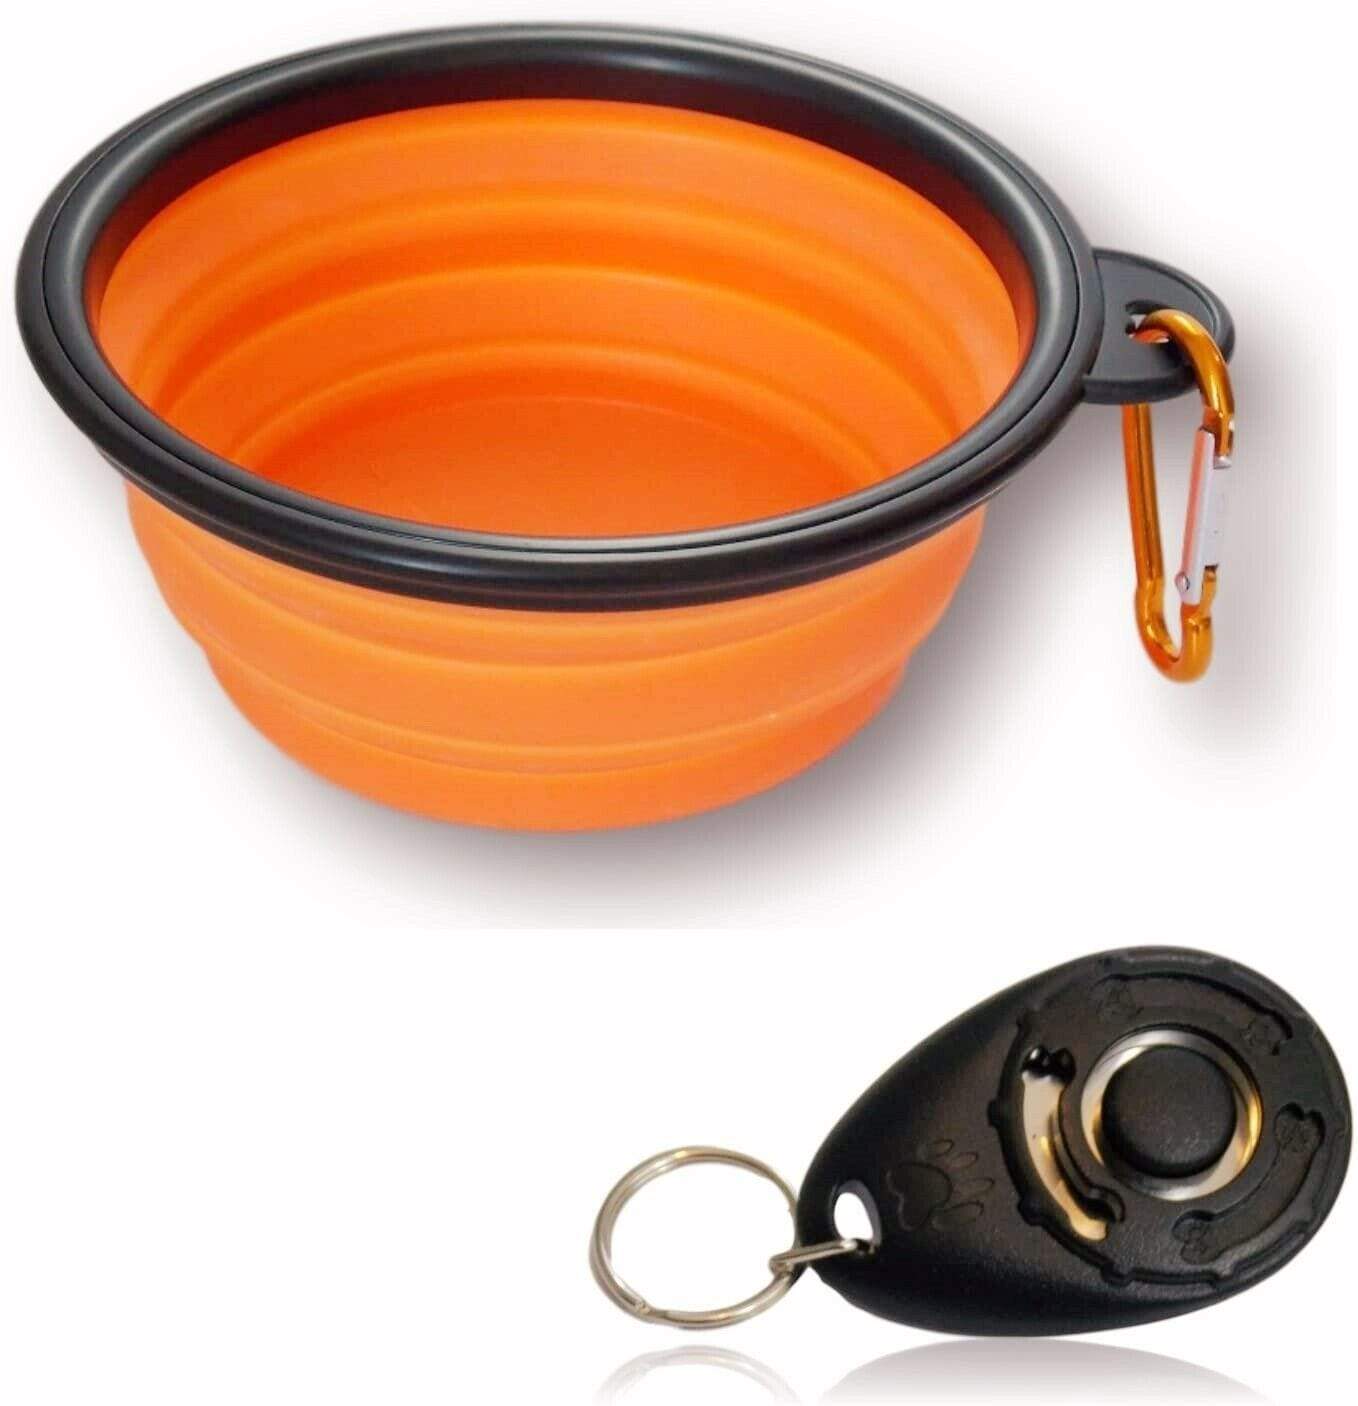 Collapsible Dog Bowl & Training Clicker - Sweetie